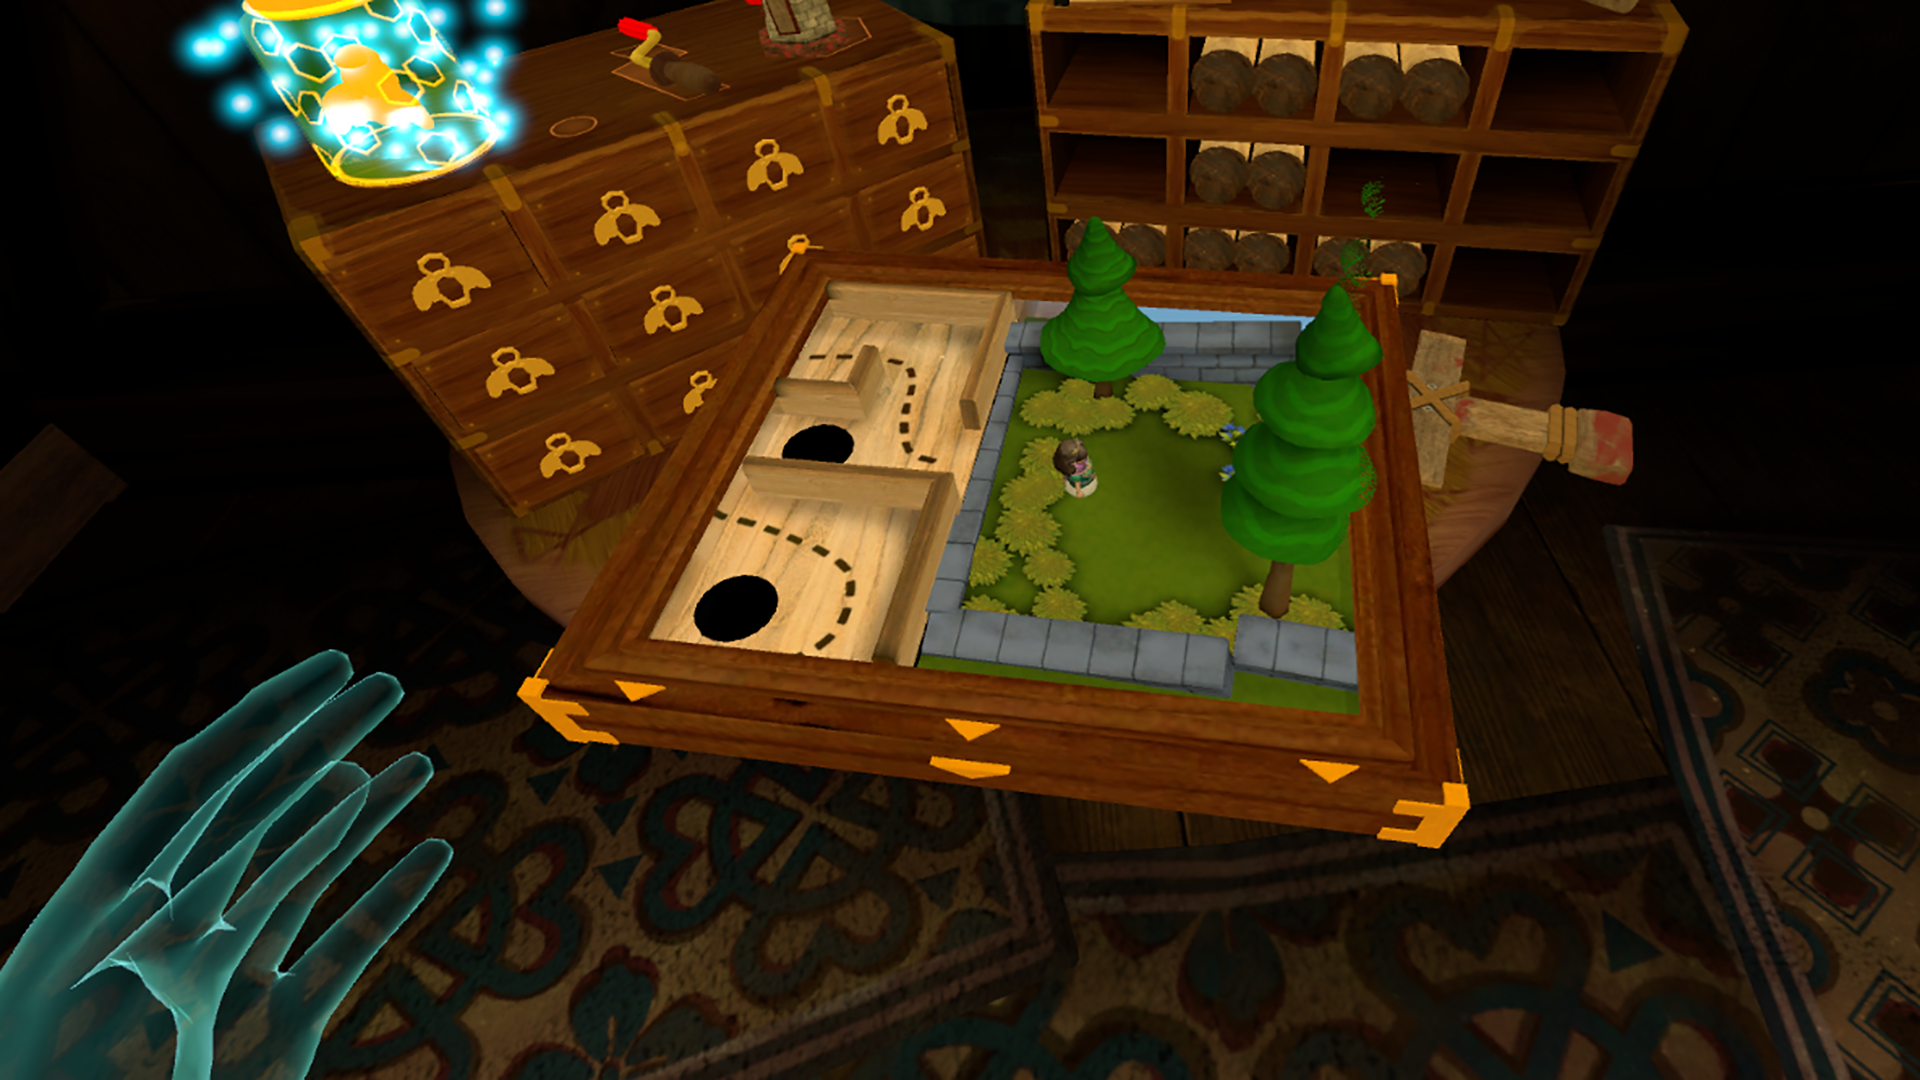 Screenshot showing Guinevere, your marble toy, leaving the wooden labyrinth and entering the world of Camelot on a magical board.